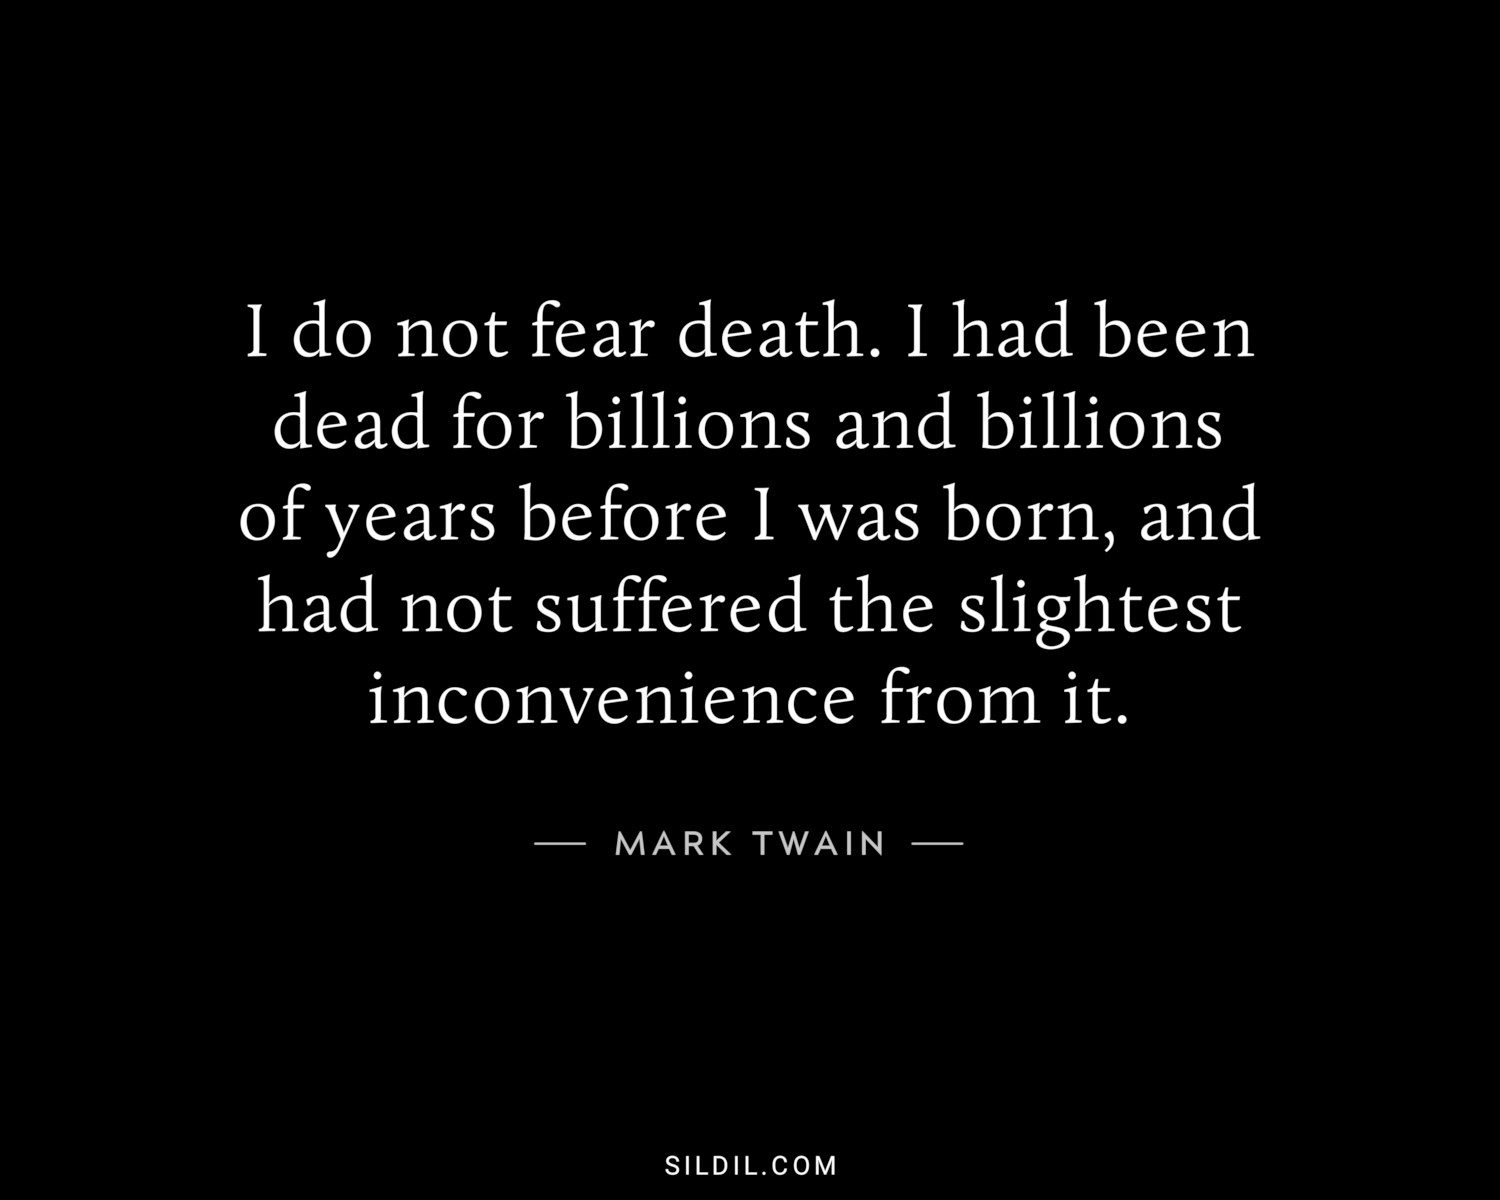 I do not fear death. I had been dead for billions and billions of years before I was born, and had not suffered the slightest inconvenience from it.